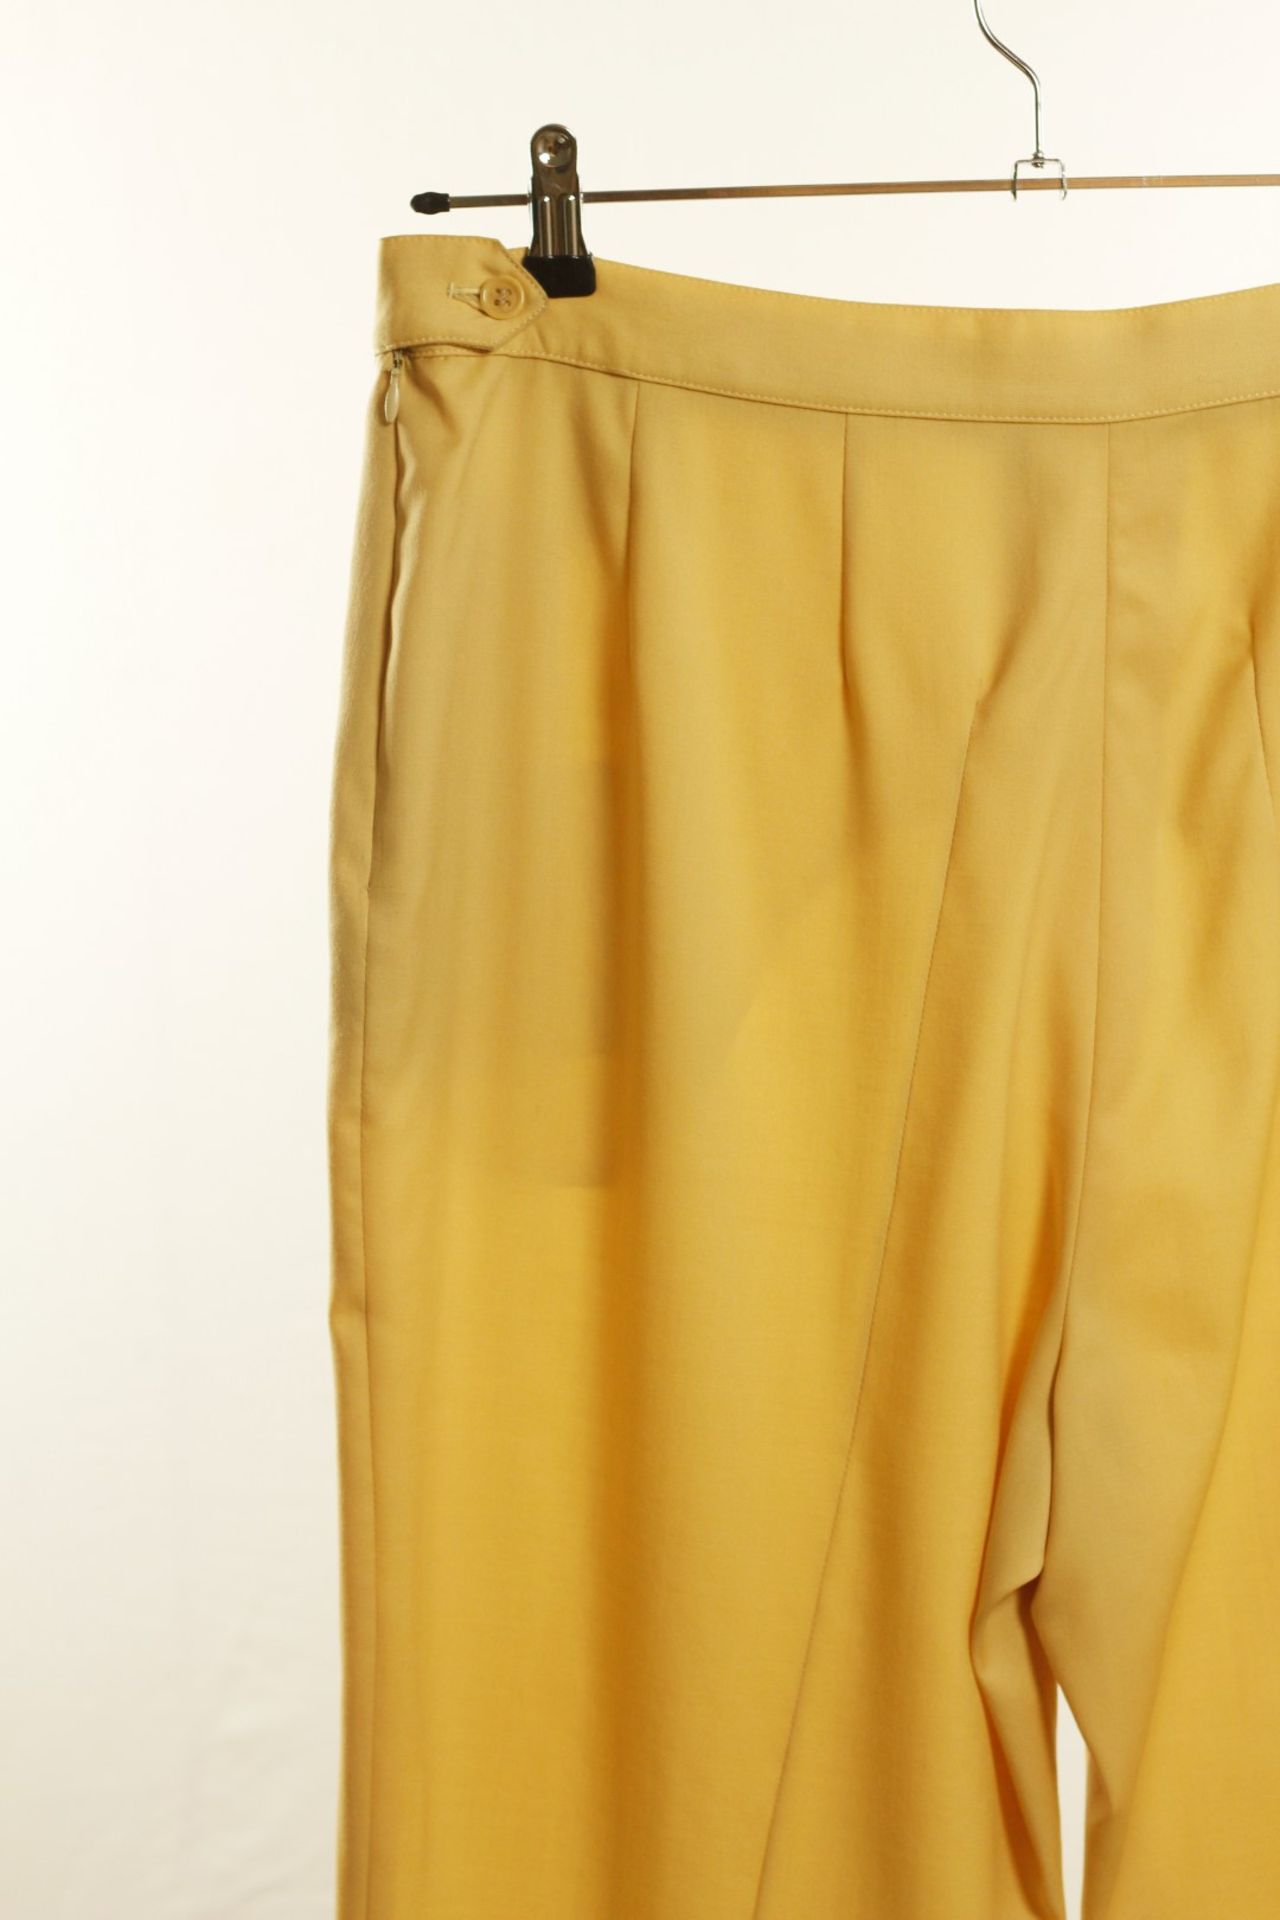 1 x Artico Cream Trousers - Size: 18 - Material: 100% Leather. Lining 50% viscose, 50% Acetate - - Image 6 of 9